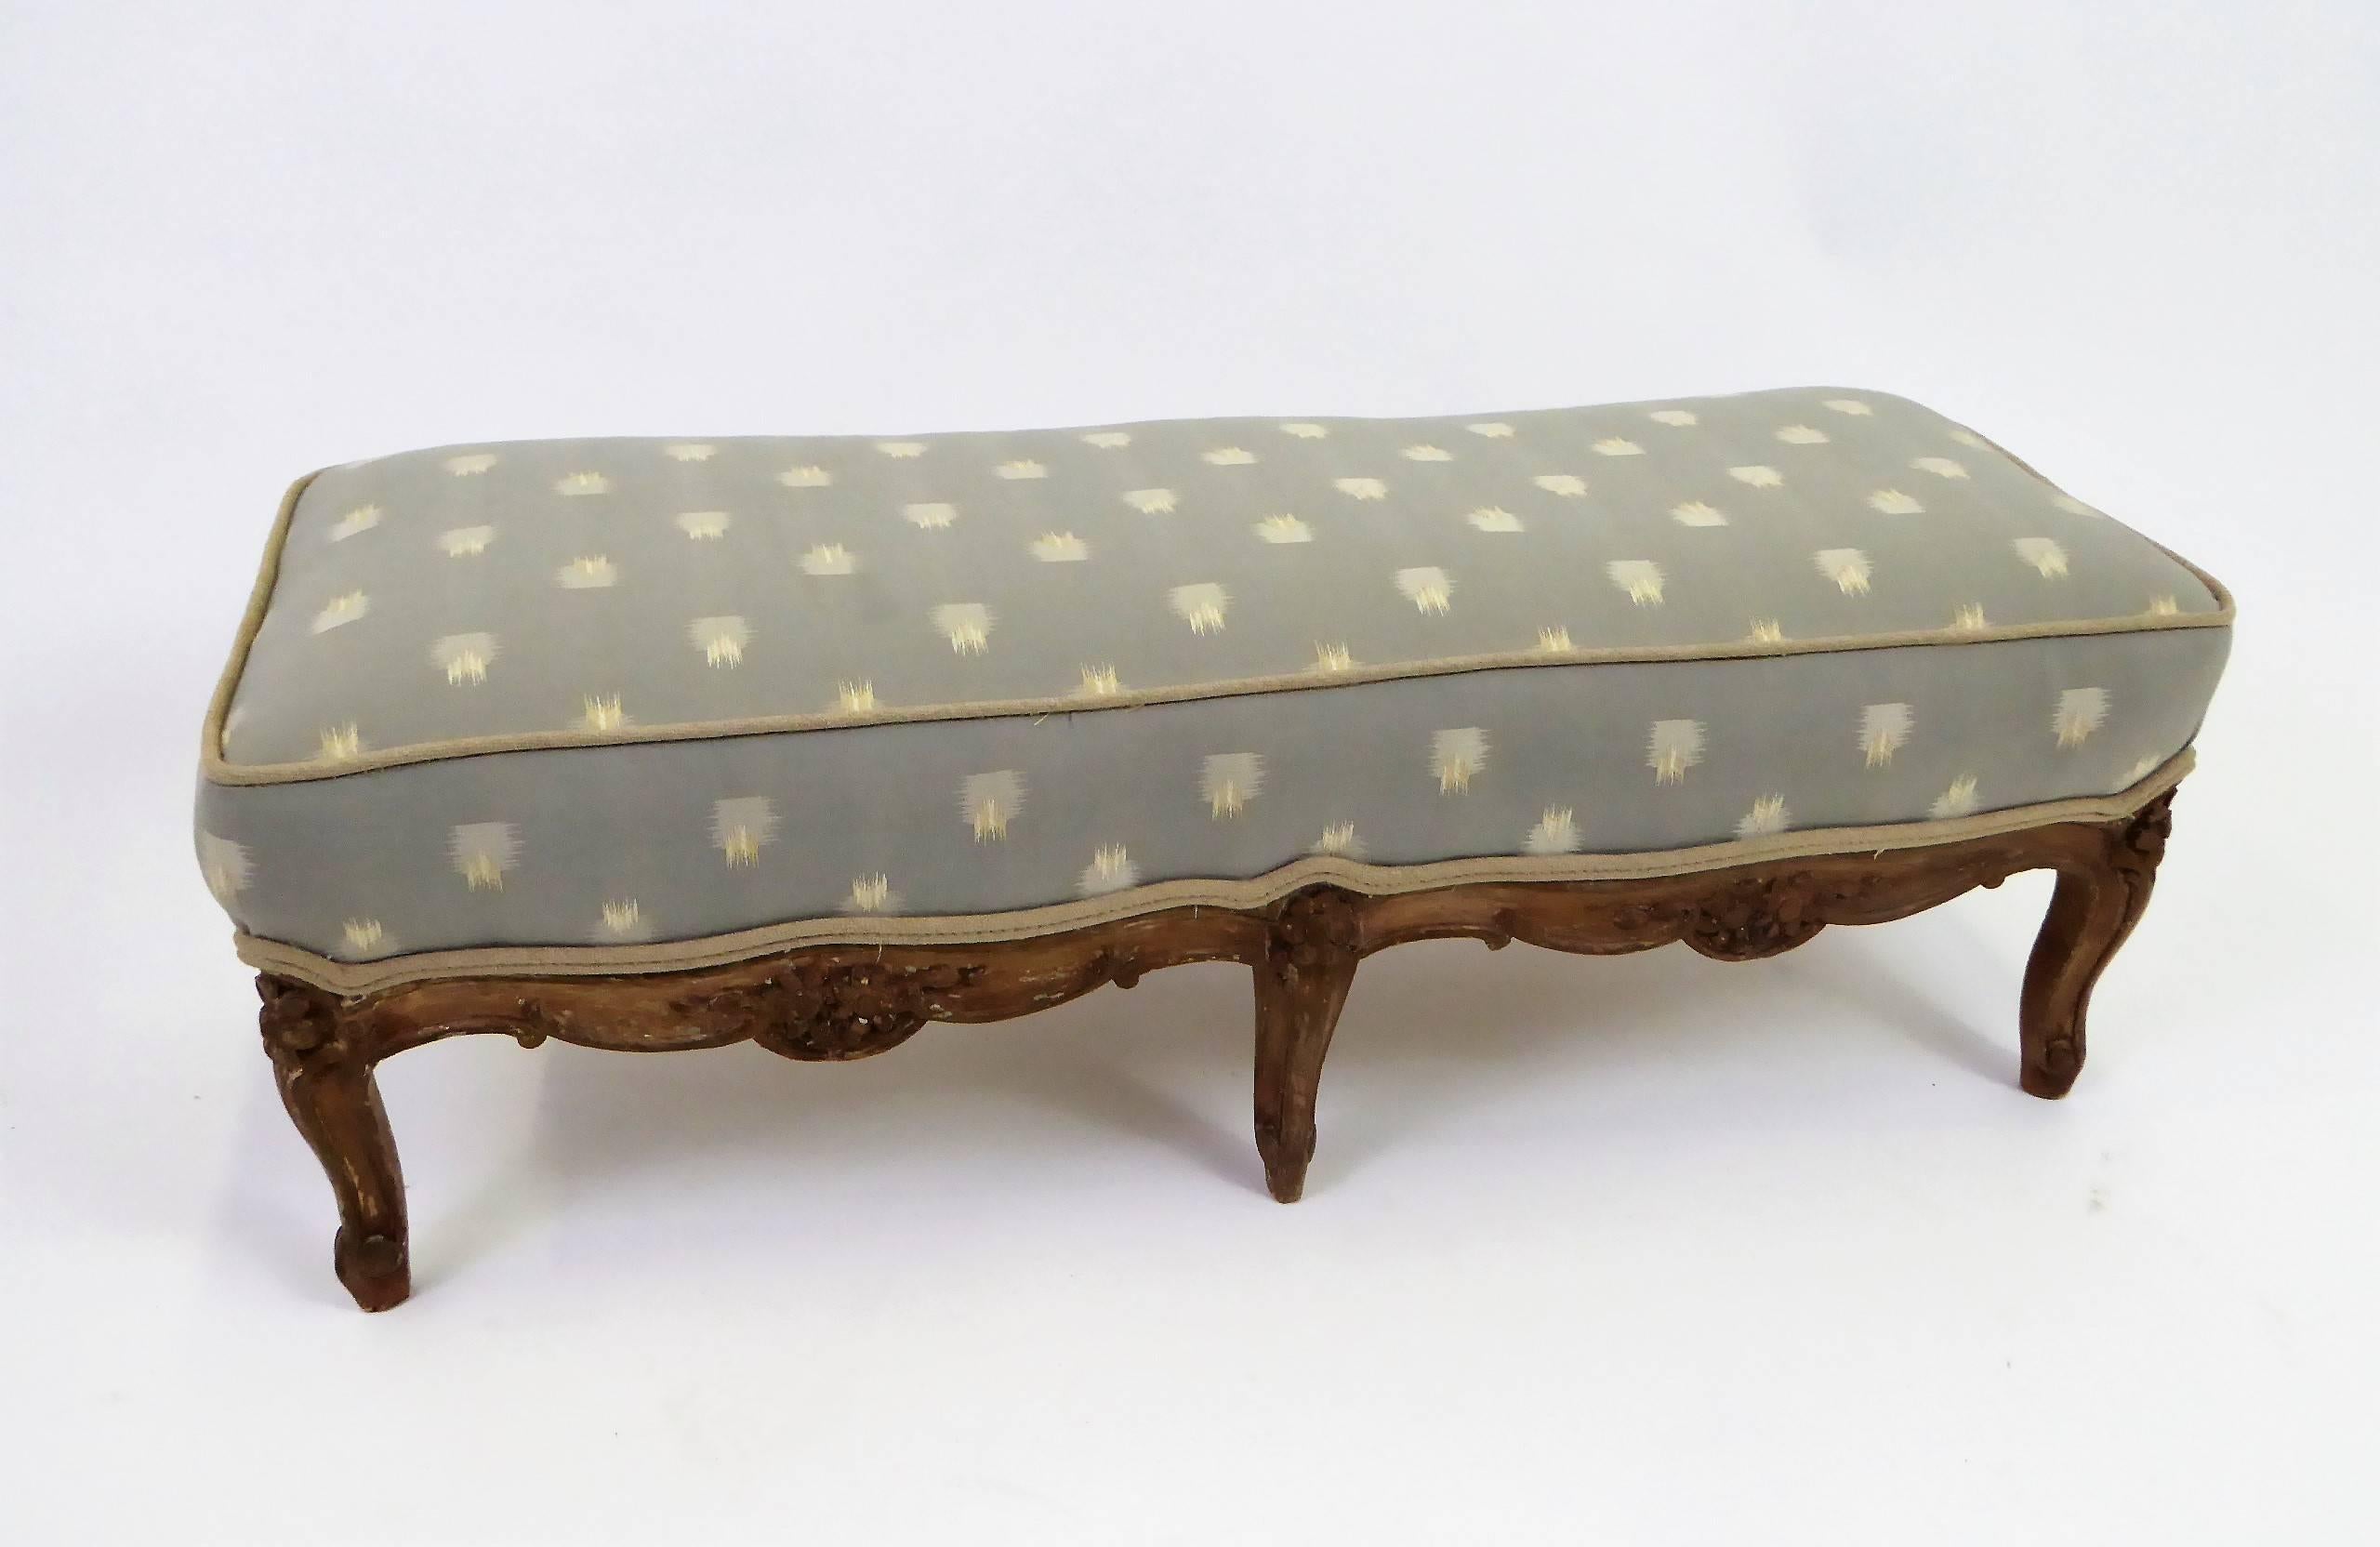 REDUCED FROM $950....Petite Louis XV carved wood footstool or low tabouret with cabriolet legs and floral carvings. Newly upholstered in a stylized woven chevron in beige and gold on a celadon grey green ground with beige linen welting. In original